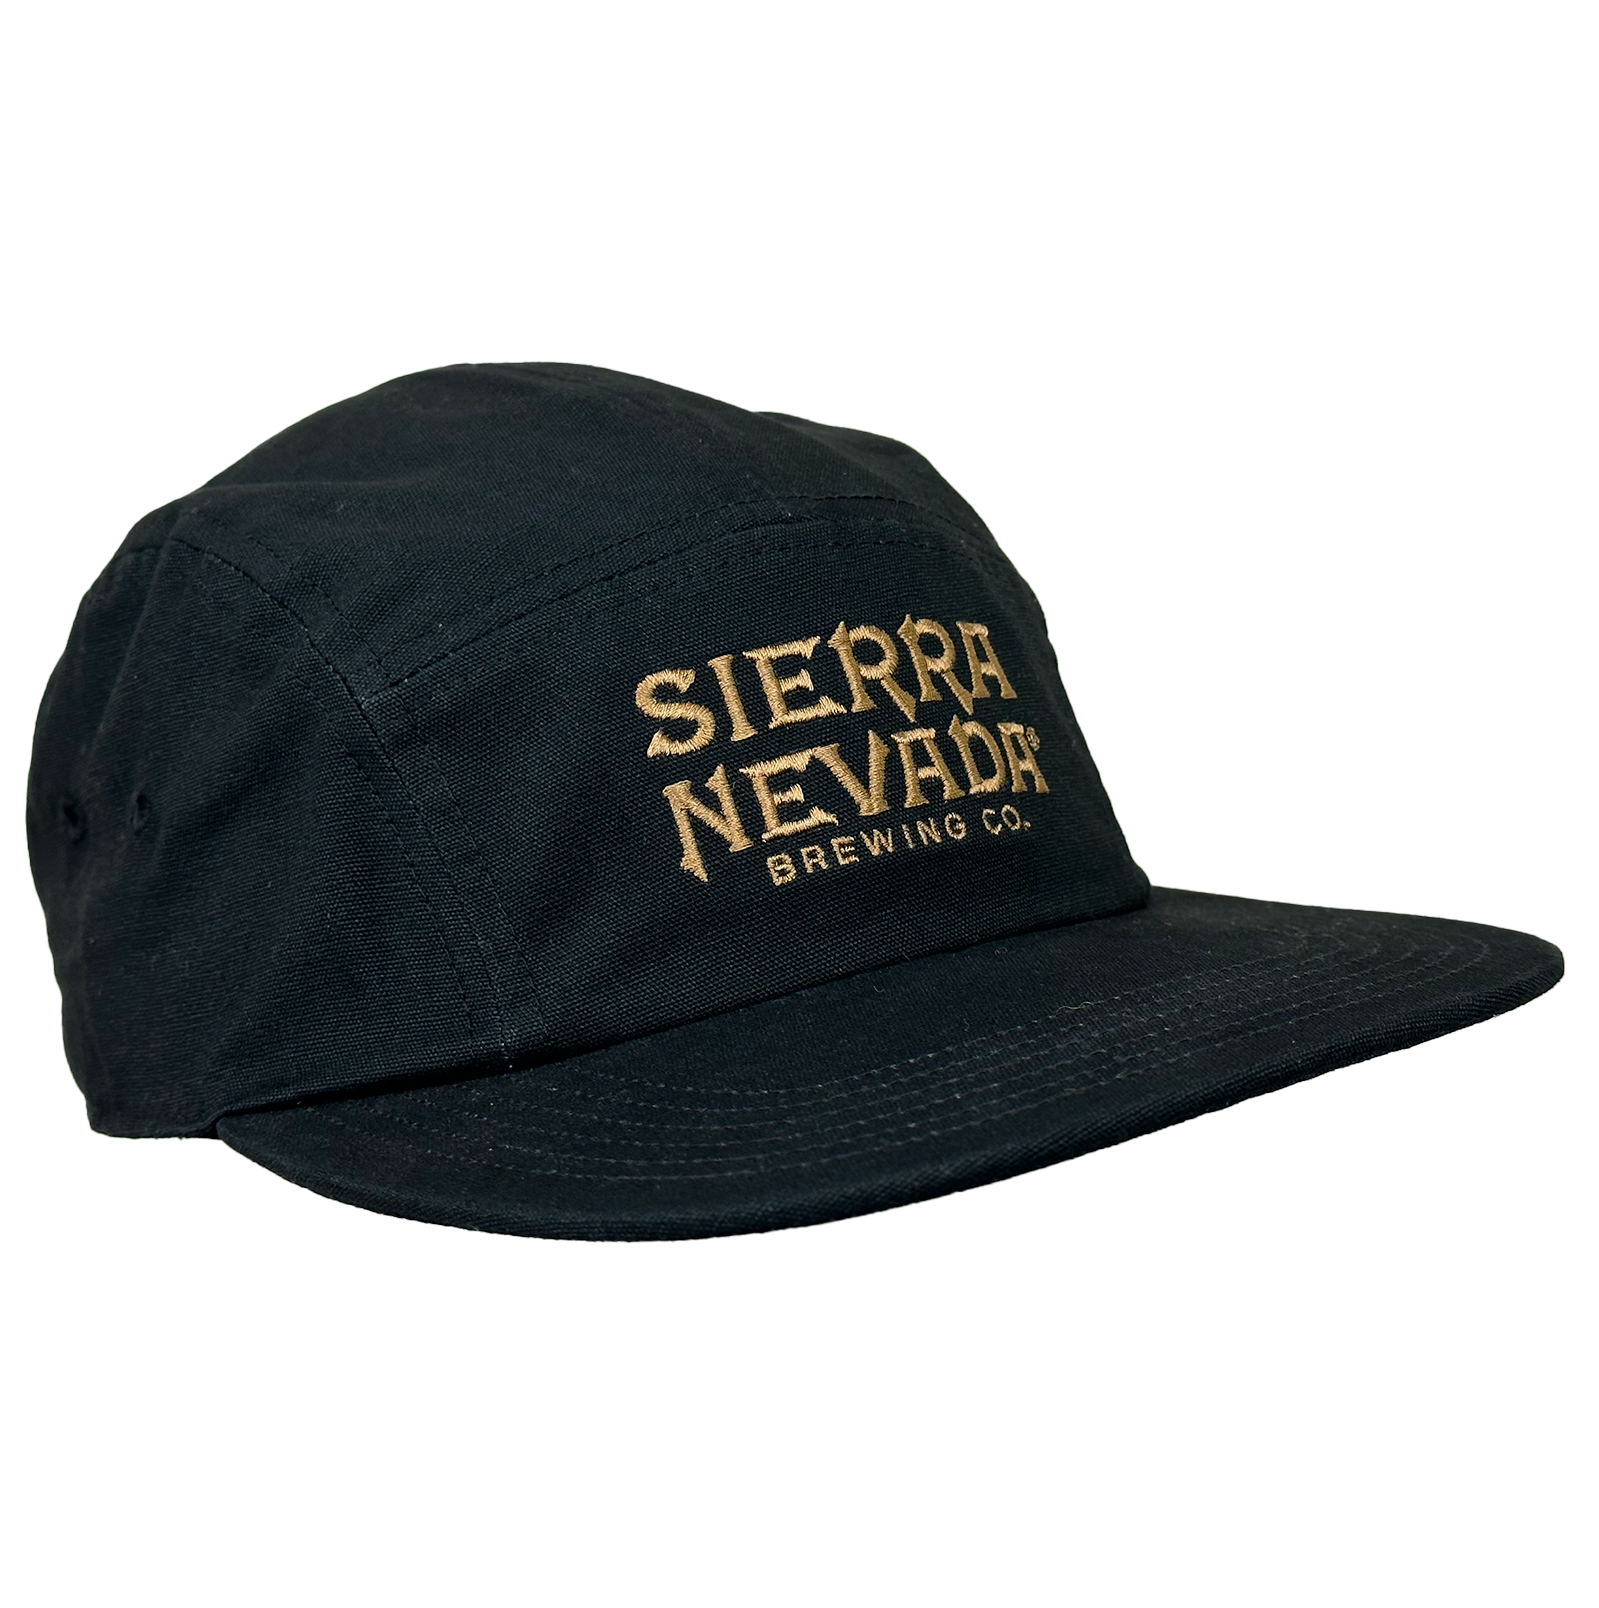 Sierra Nevada Camper Hat - front view featuring embroidered text